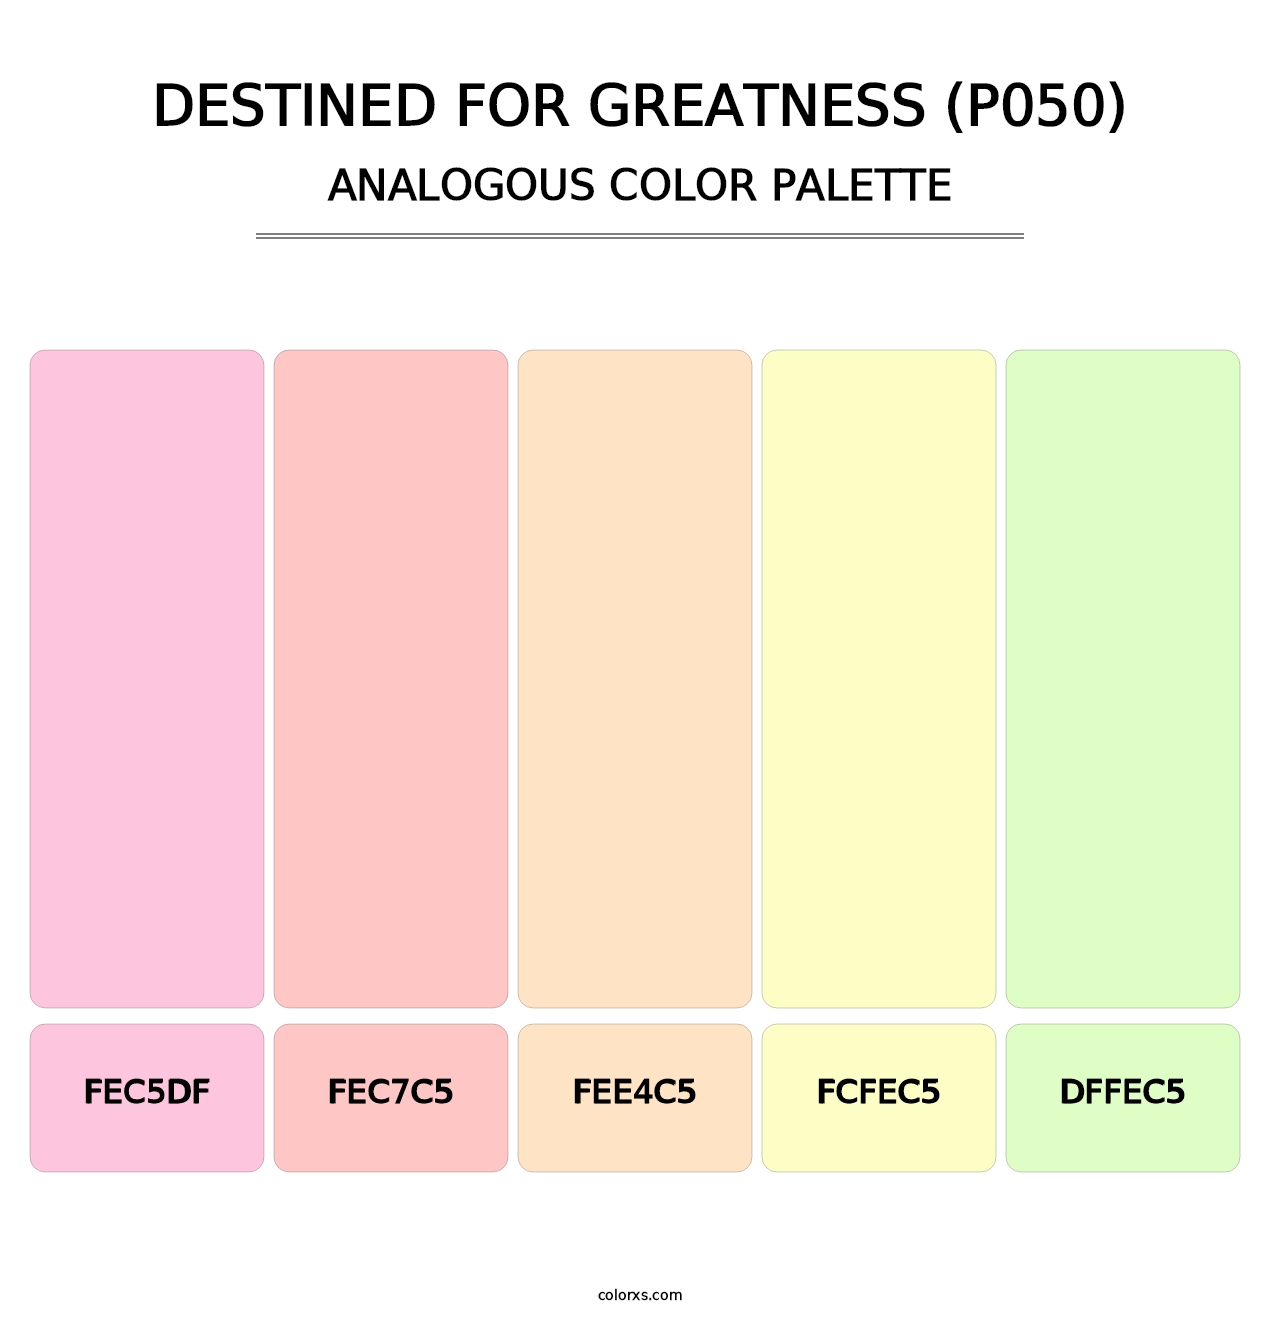 Destined for Greatness (P050) - Analogous Color Palette